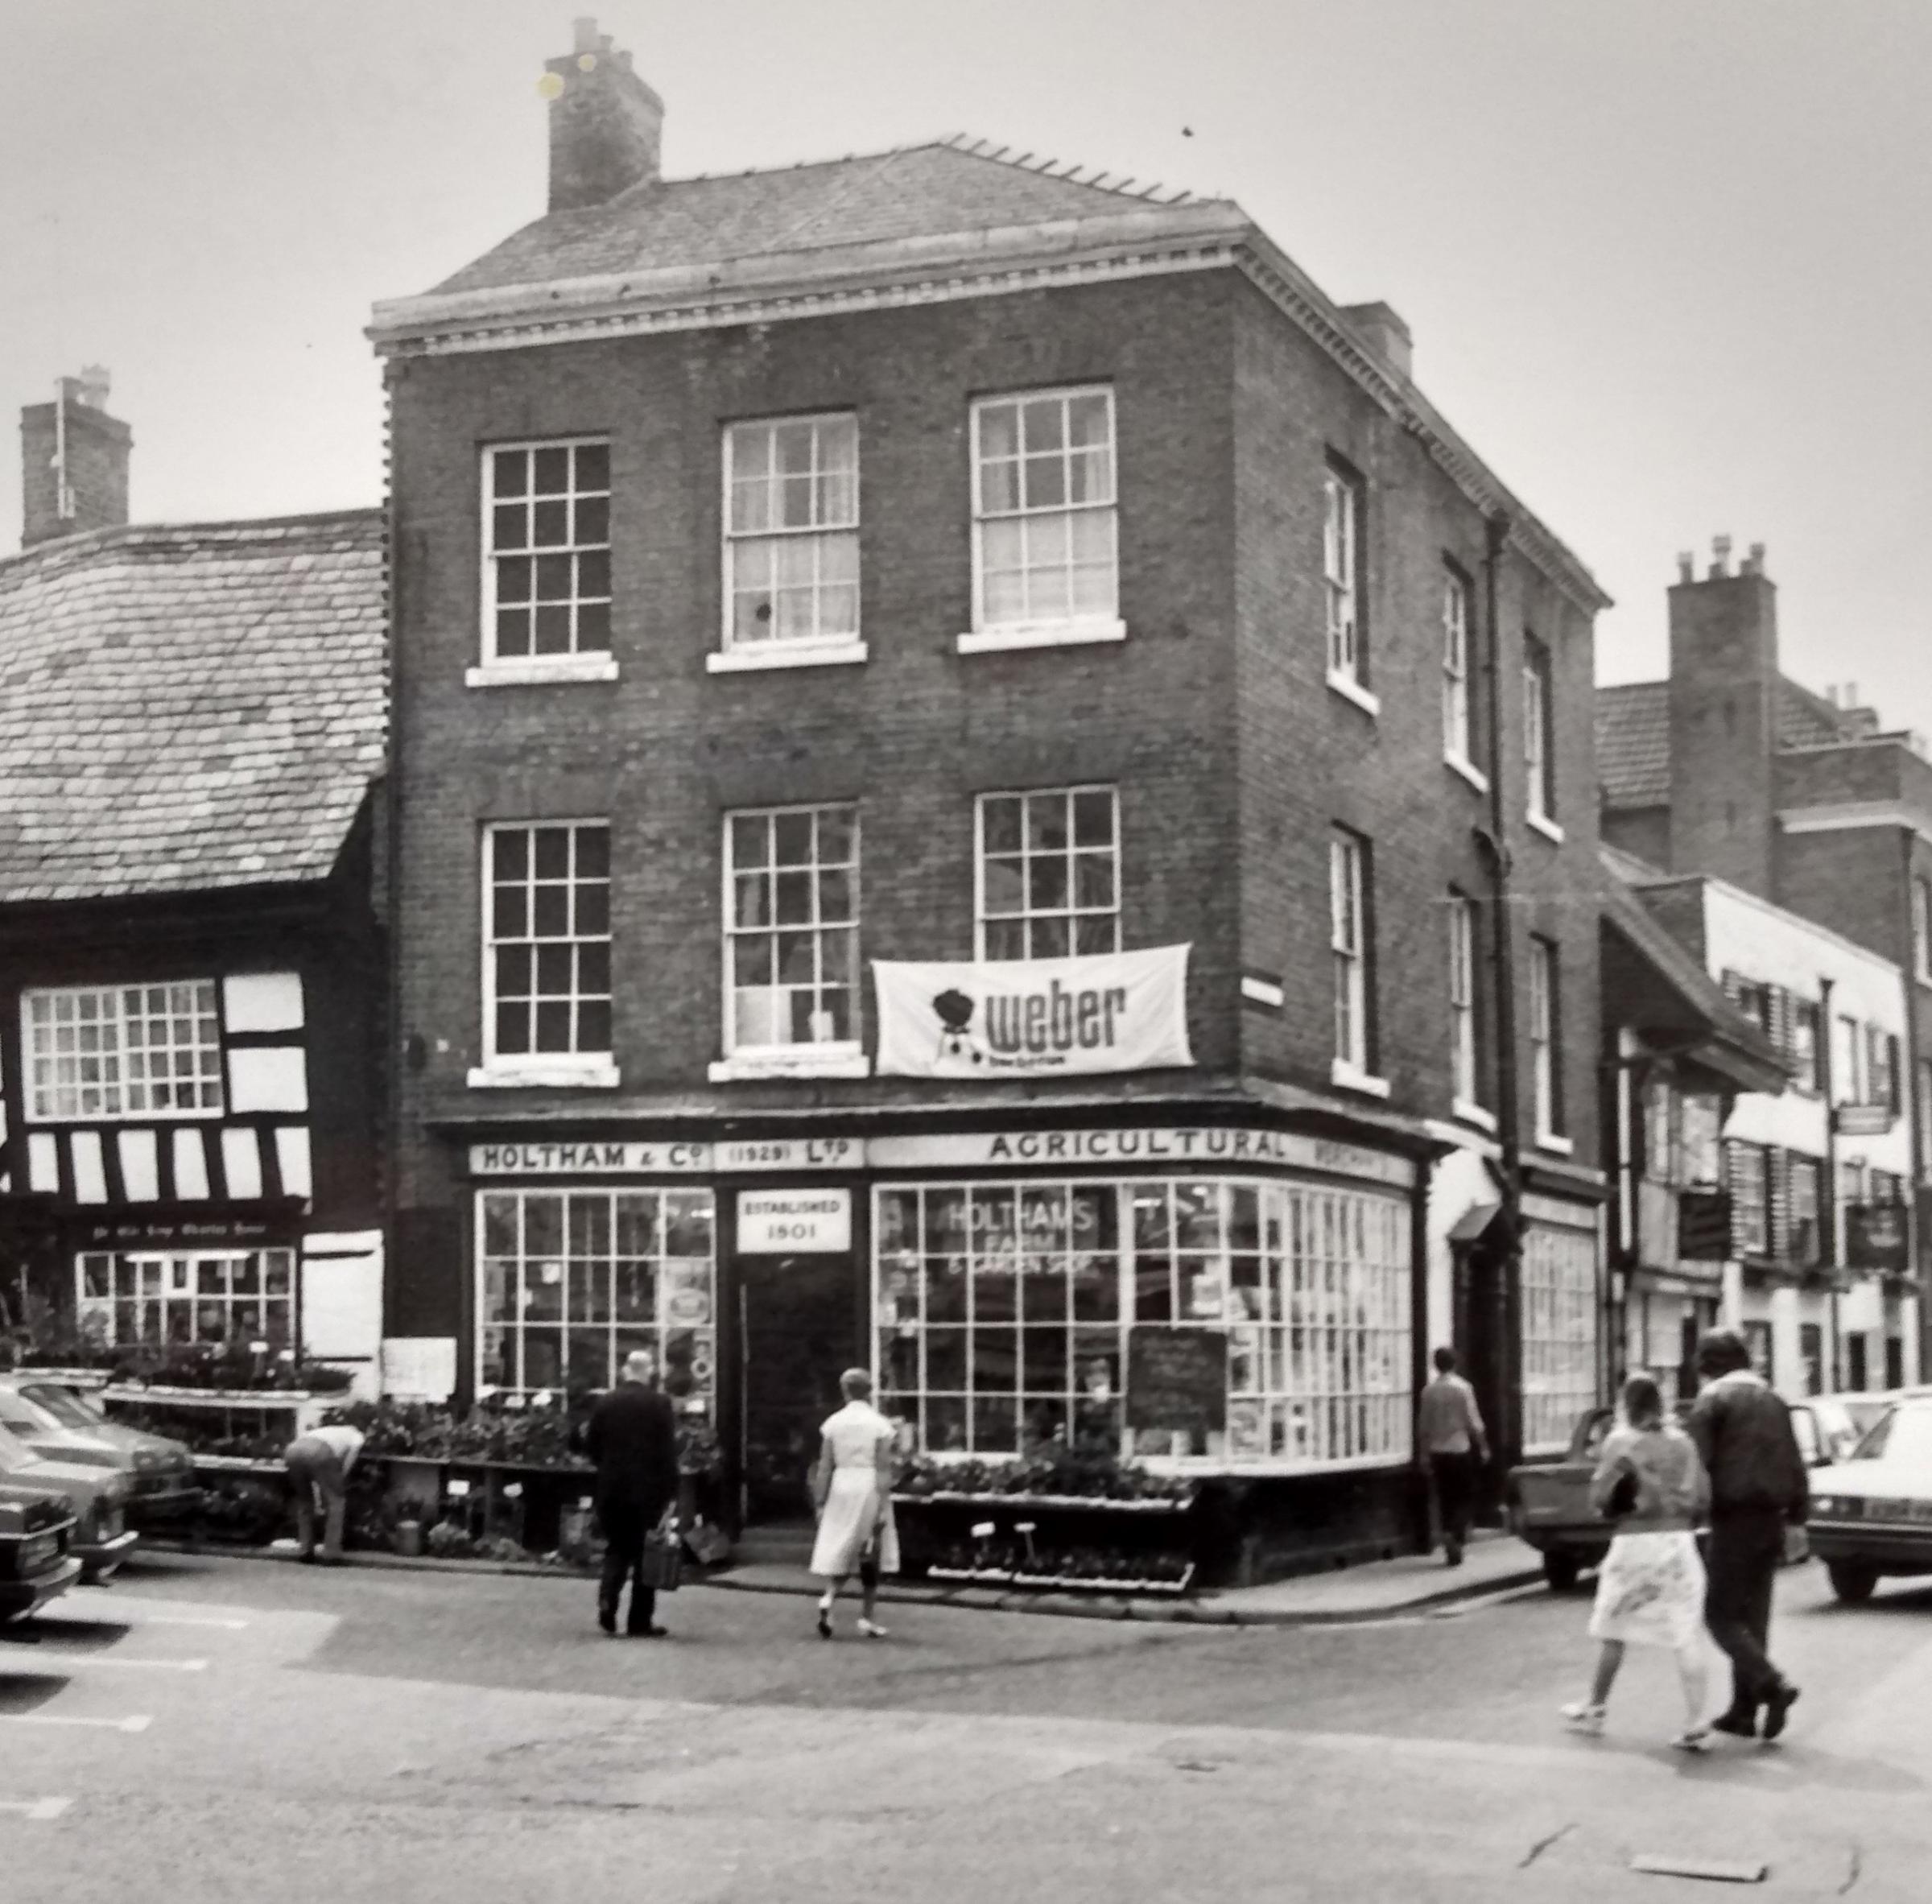 Holtham’s shop in the black-and-white timbered building was a familiar feature for many years. This picture was taken in 1984